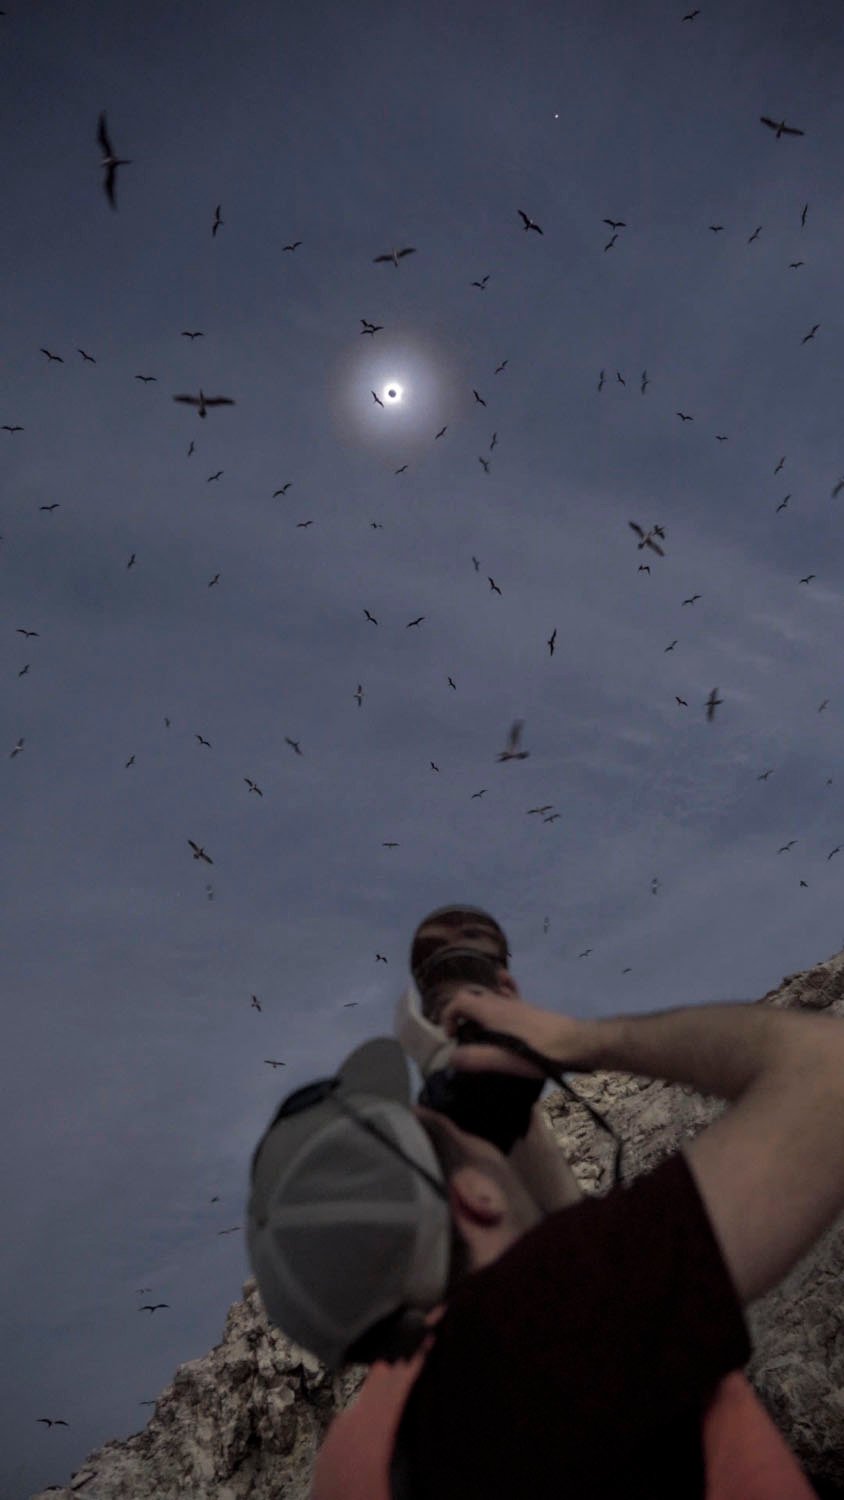 Under a dim sky, a man captures a lunar eclipse with a camera, surrounded by countless flying birds.